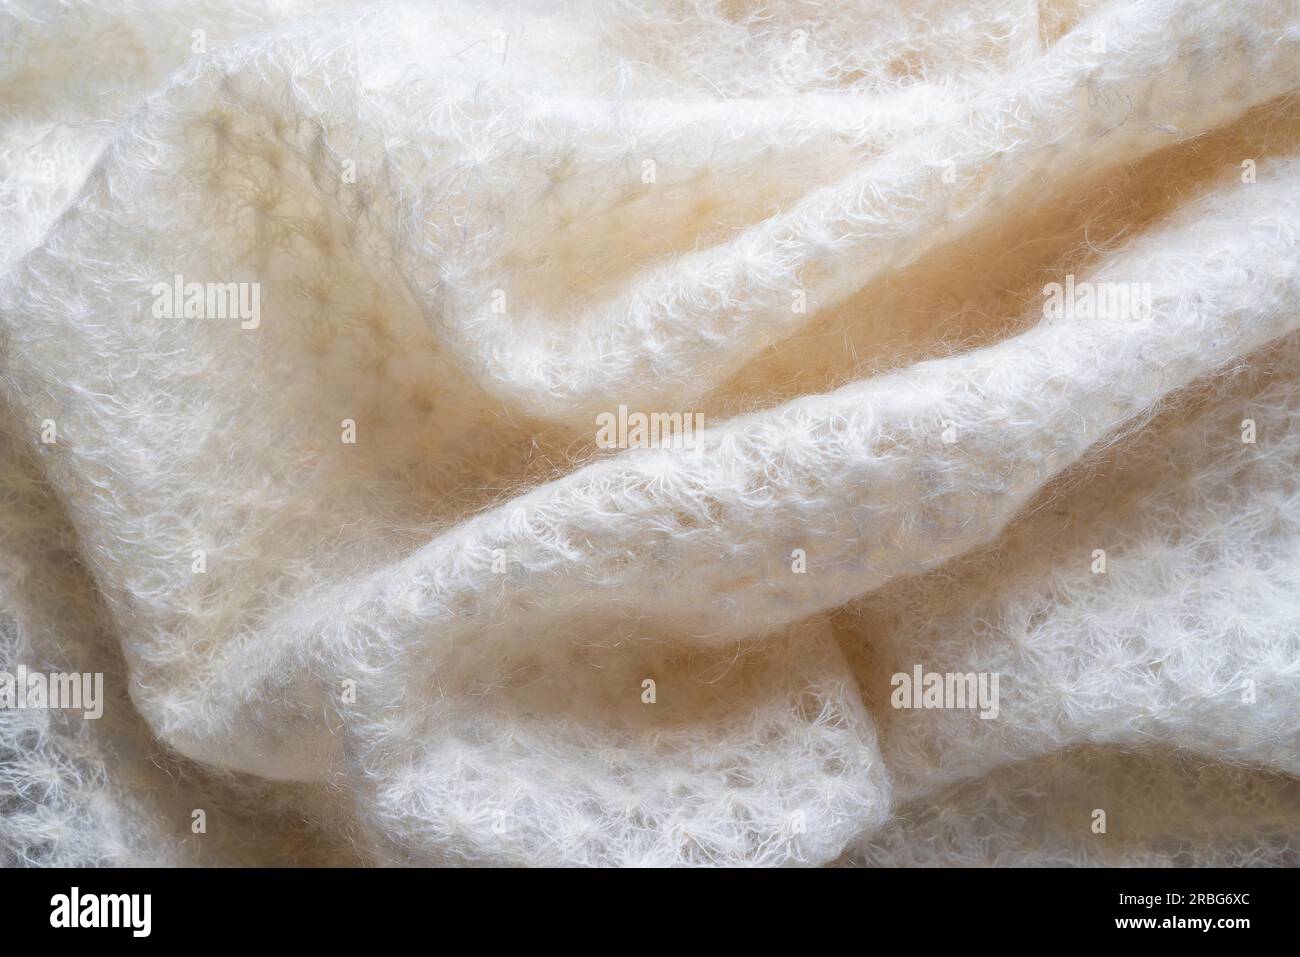 Soft folds of a white goat fluff scarf to be used as background Stock Photo